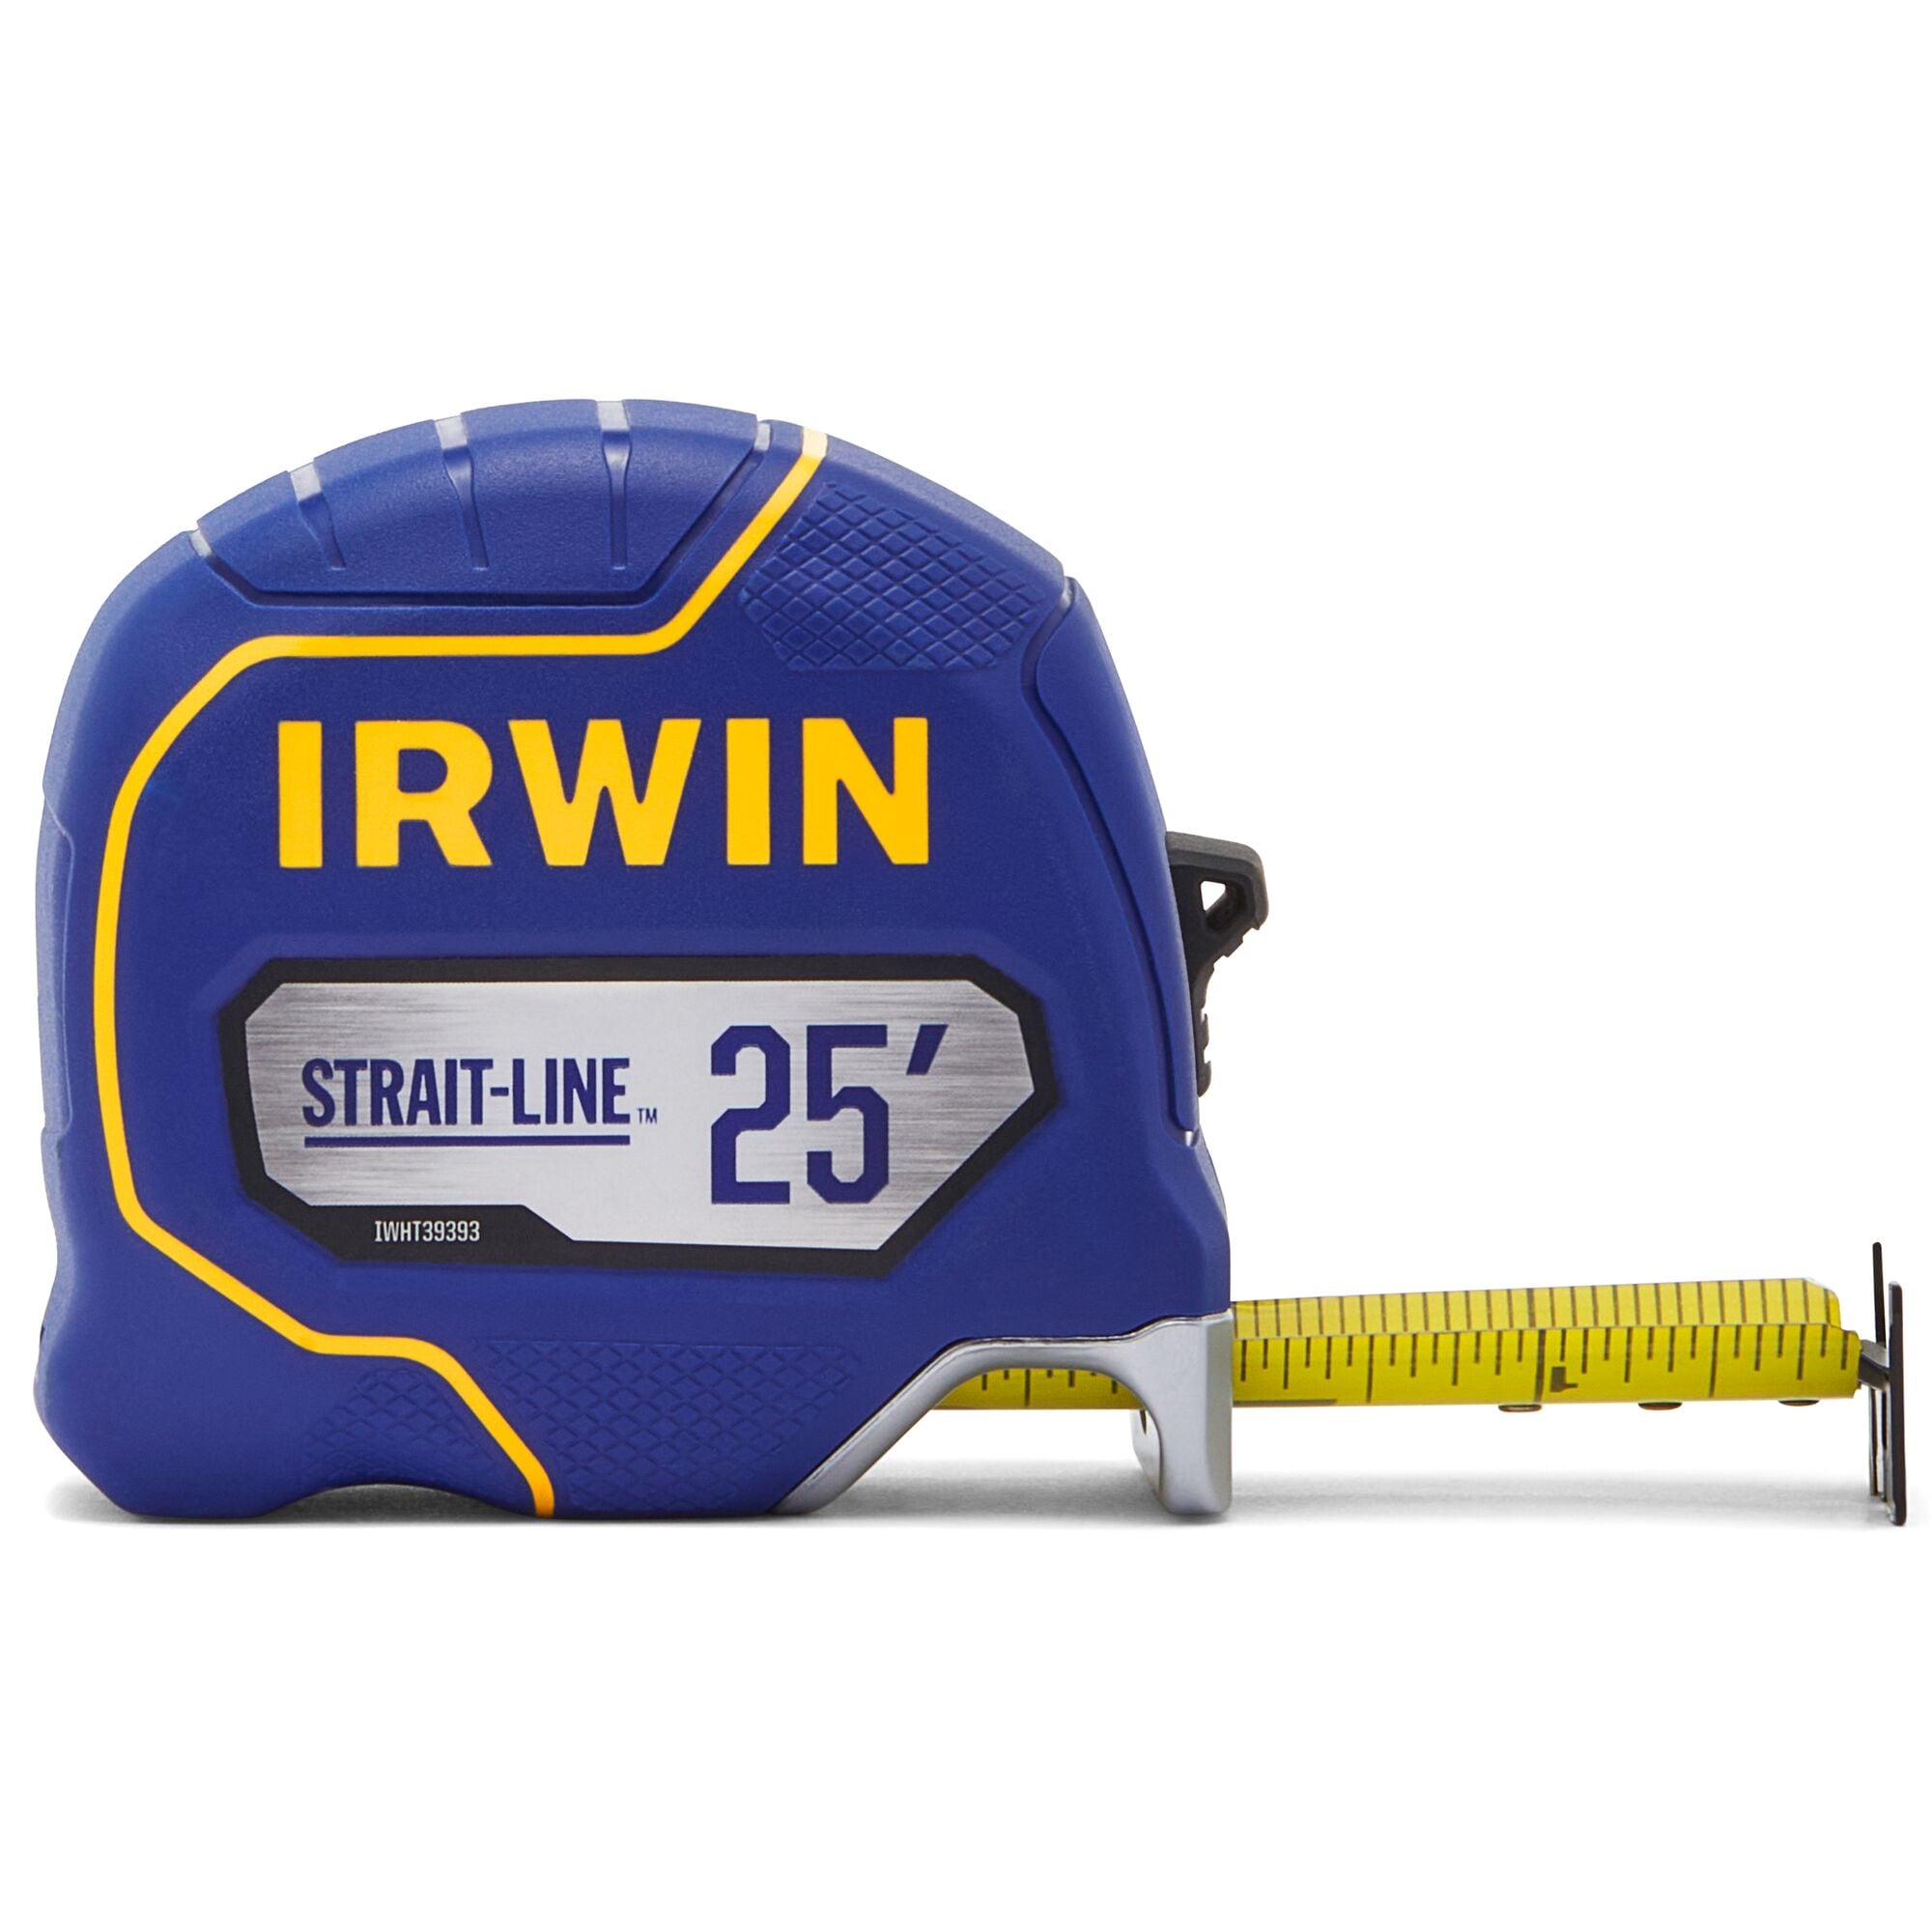 Tape Measure Cal Hawk Measuring Tape 25 feet by 1 inch SAE/MM 25' x 1 NEW